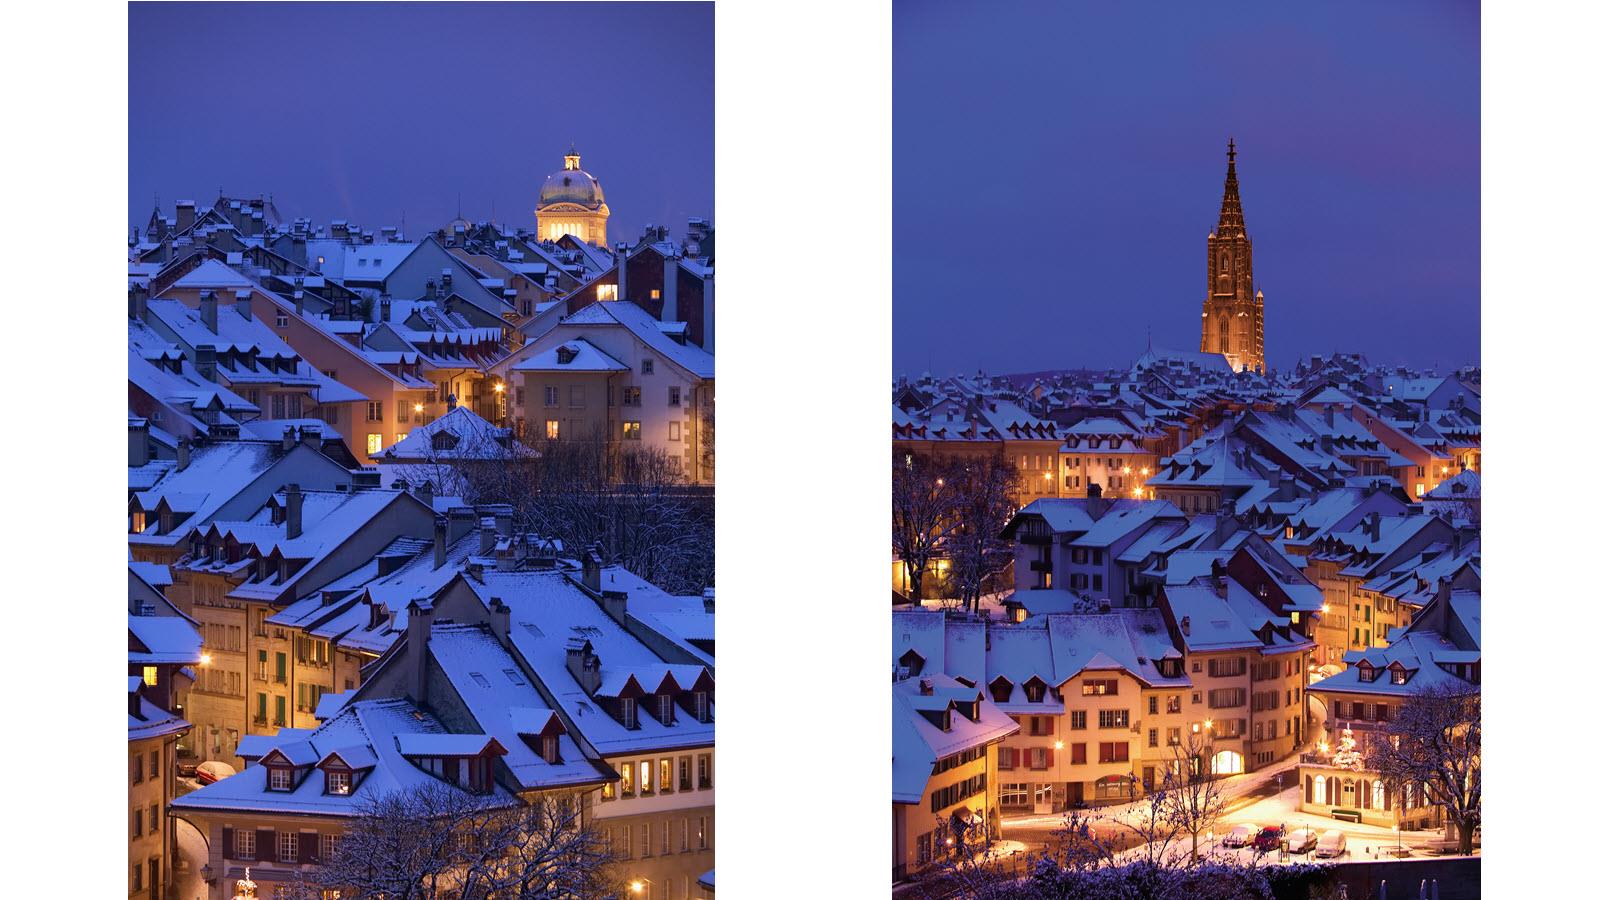 Two nighttime photos of Bern, Switzerland at night with darkened blue skies and the glow of city lights. 